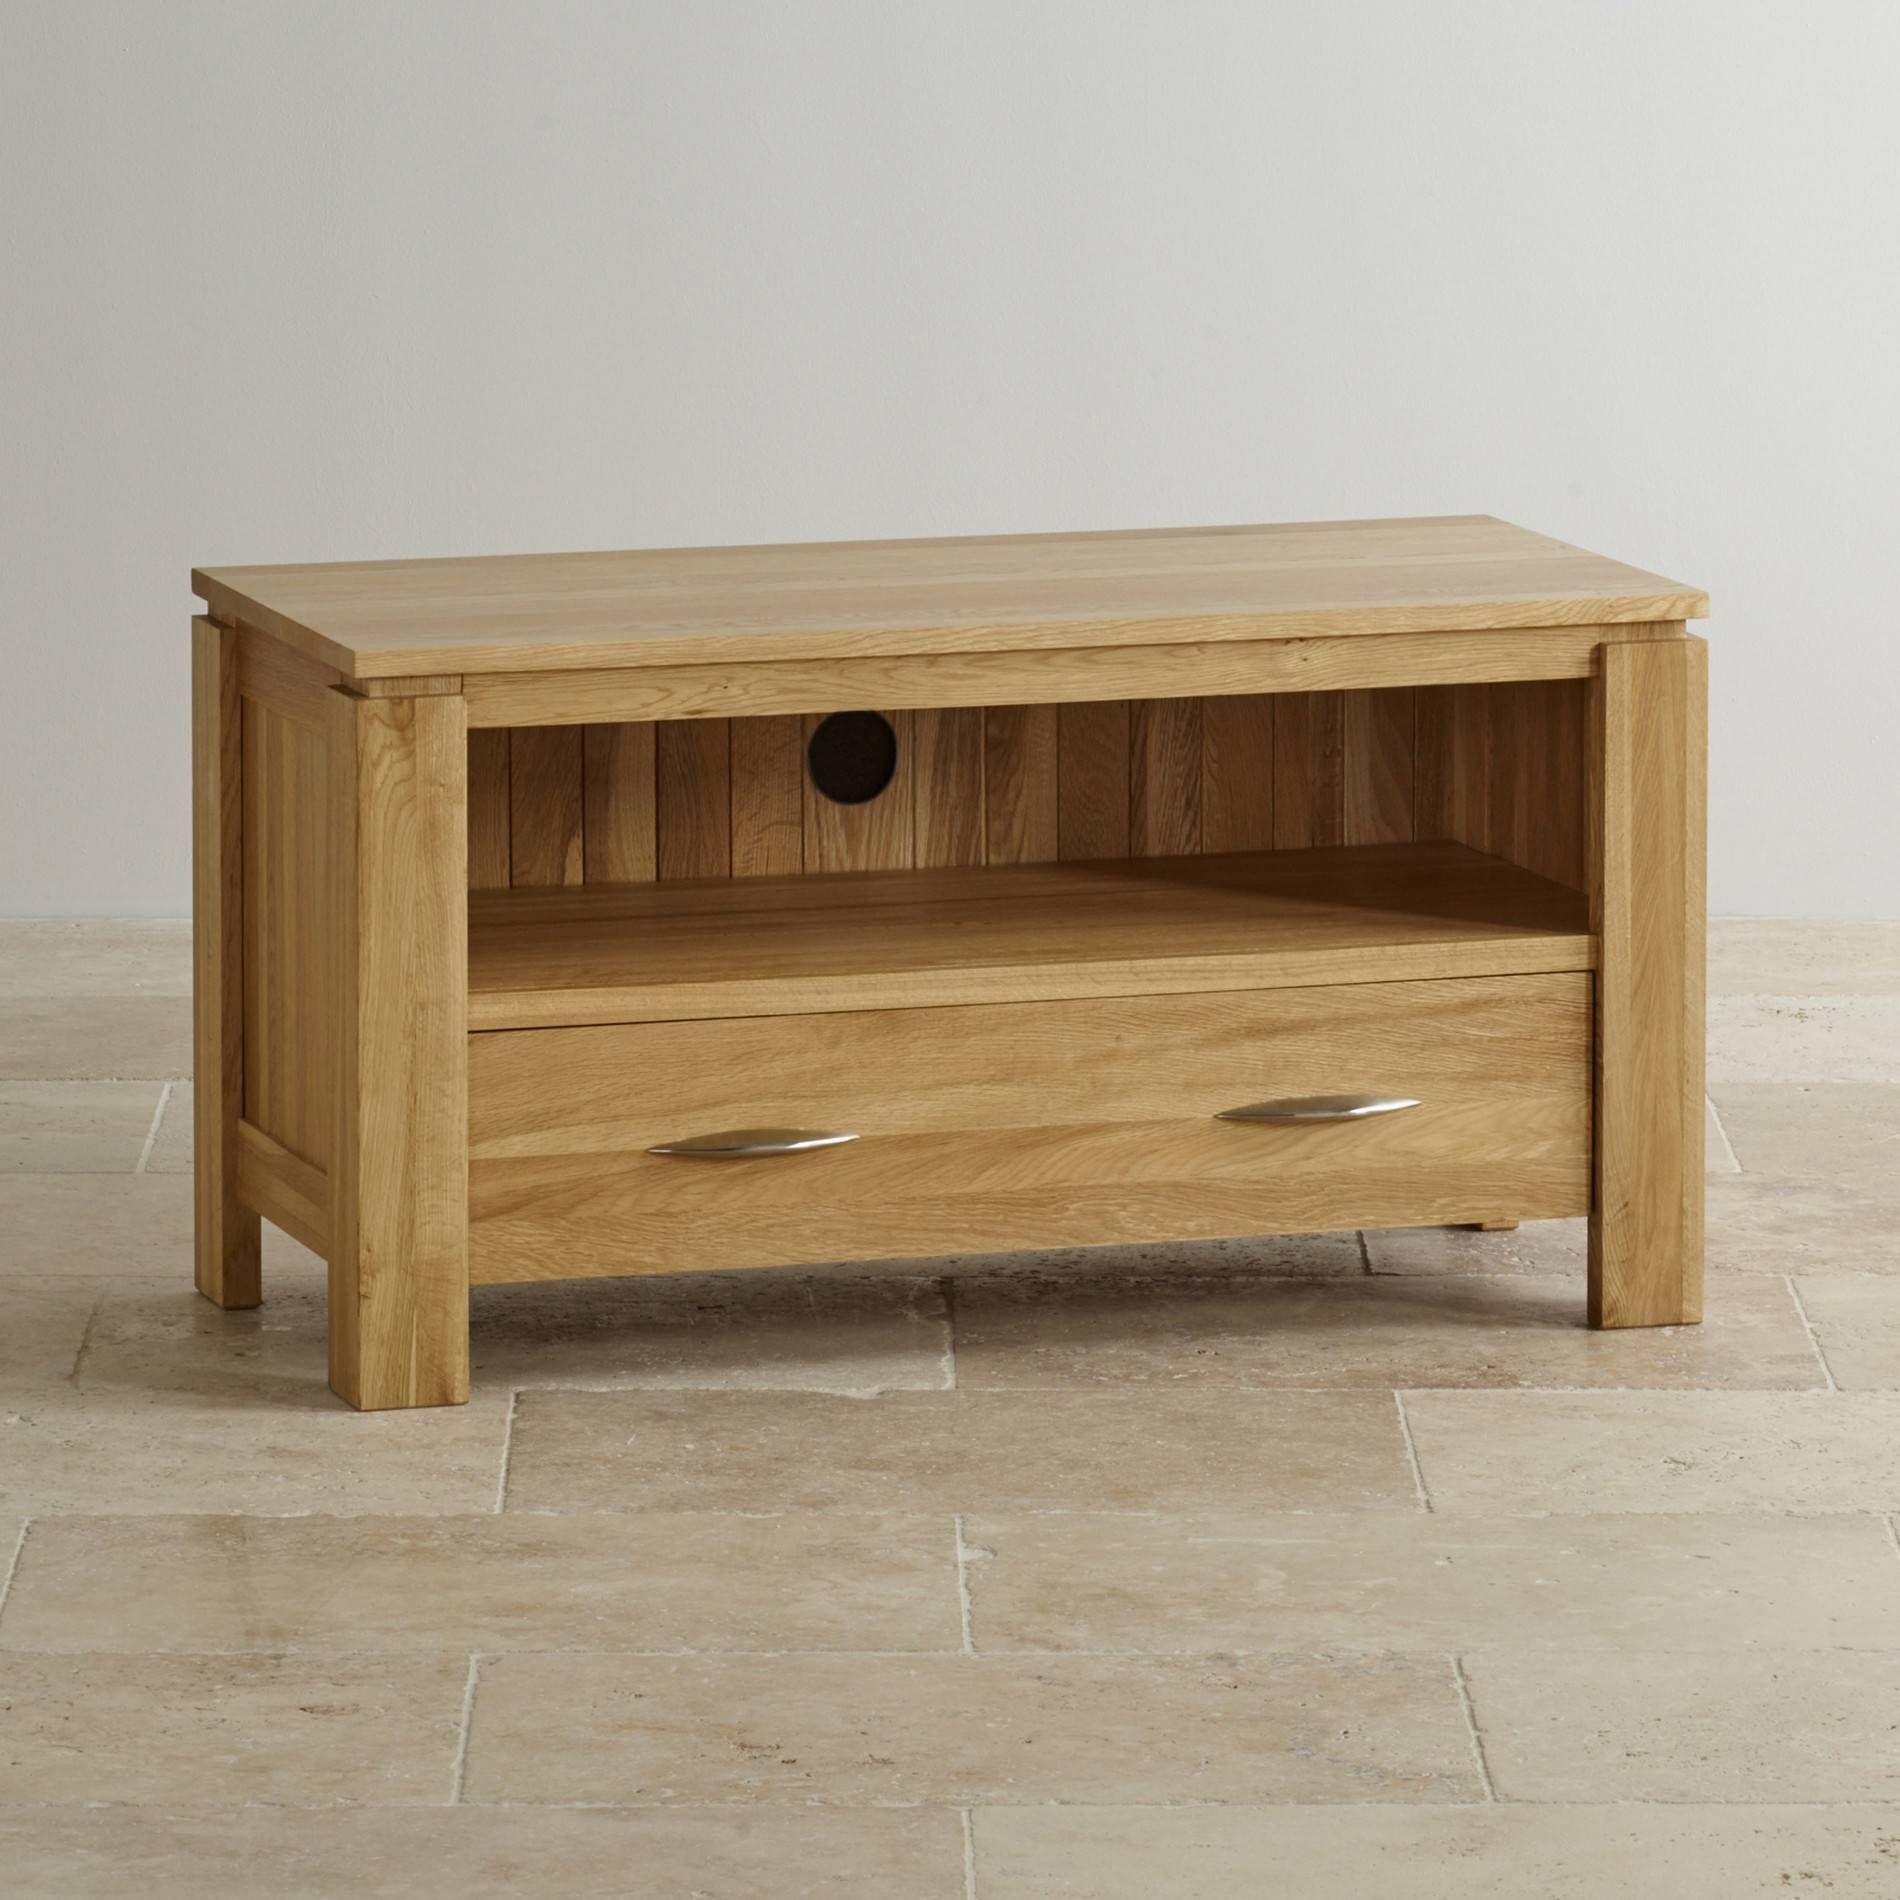 Galway Natural Solid Oak Tv + Dvd Stand | Living Room Furniture Within Solid Oak Tv Cabinets (View 4 of 15)